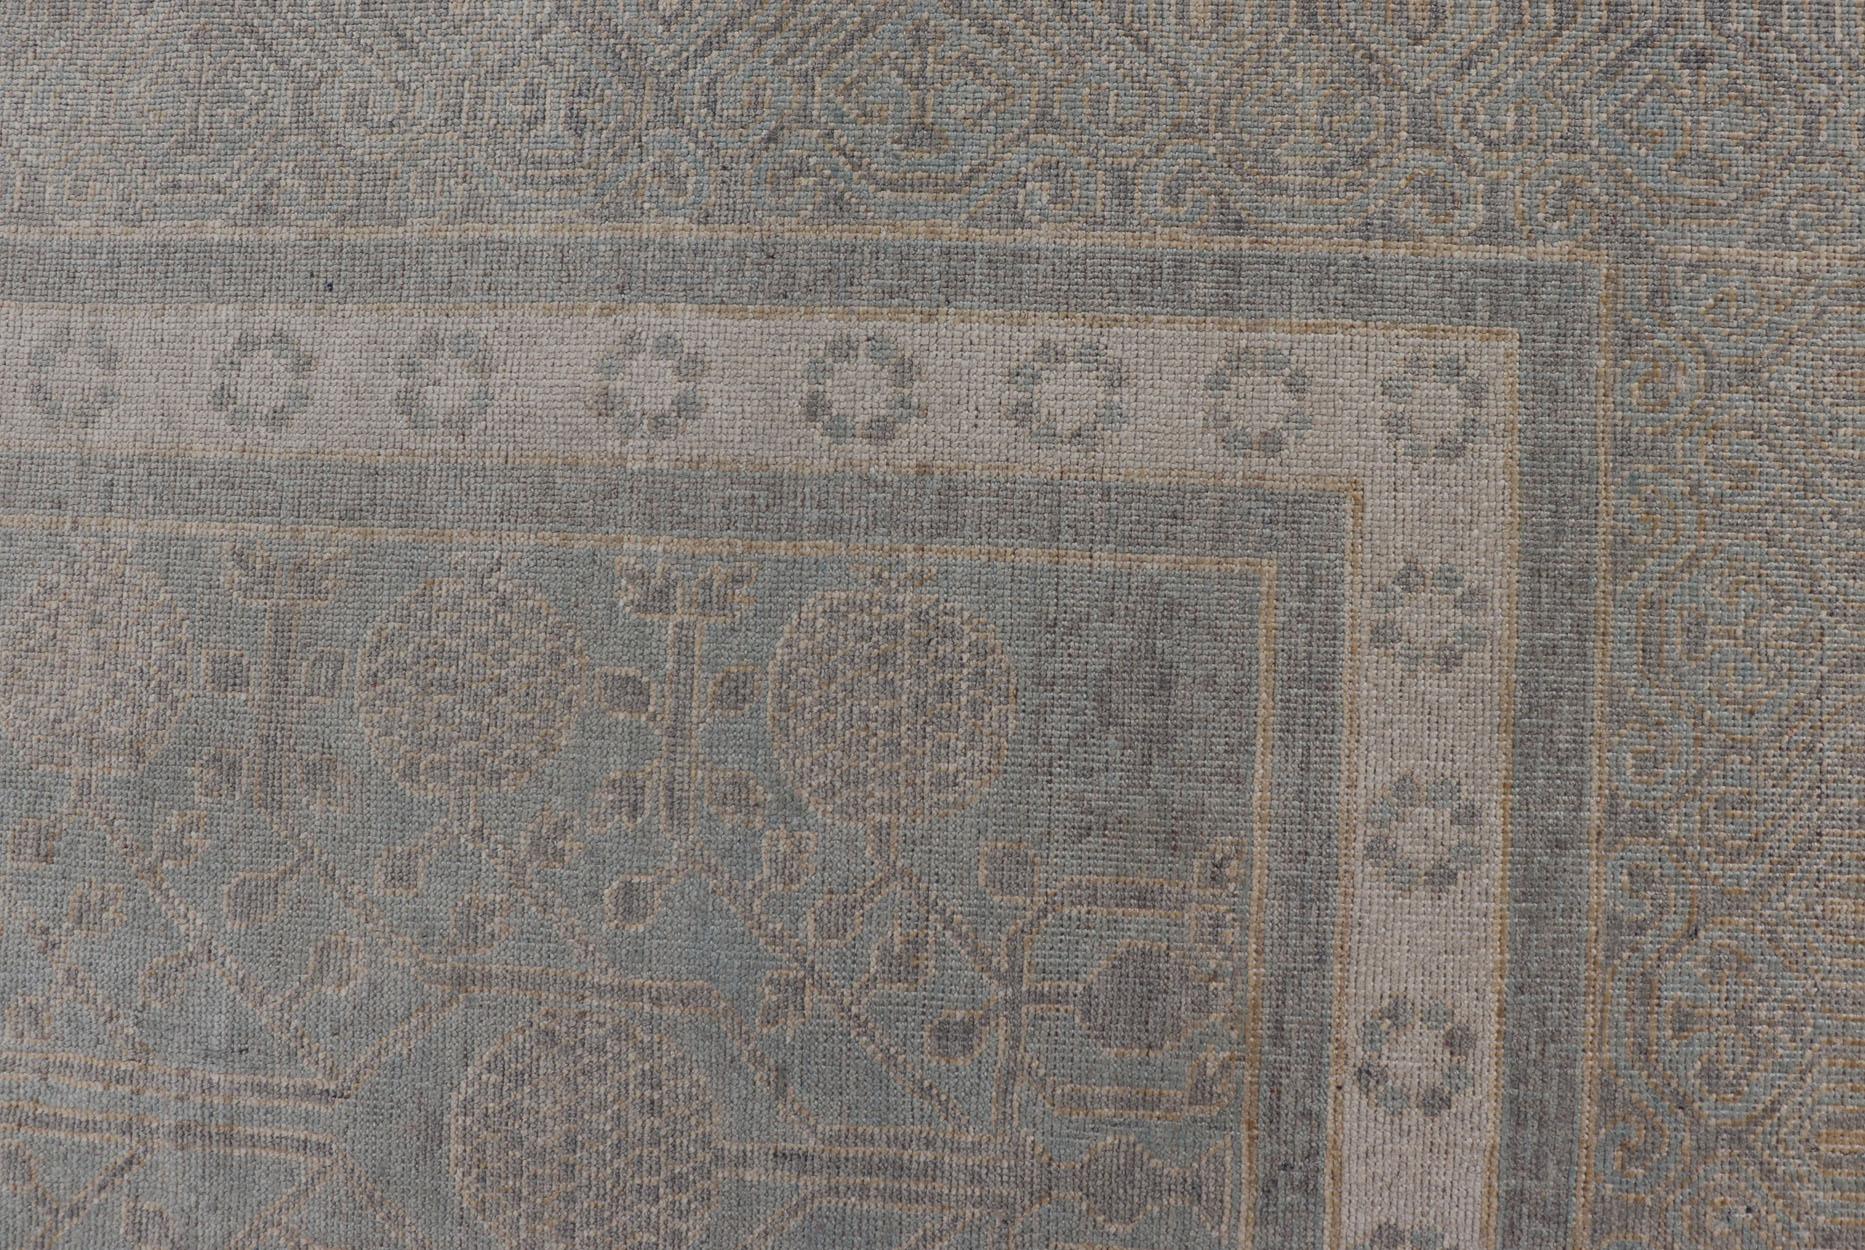 Afghan Khotan Rug with Geometric Design in Shades of Light Blue and Taupe For Sale 9